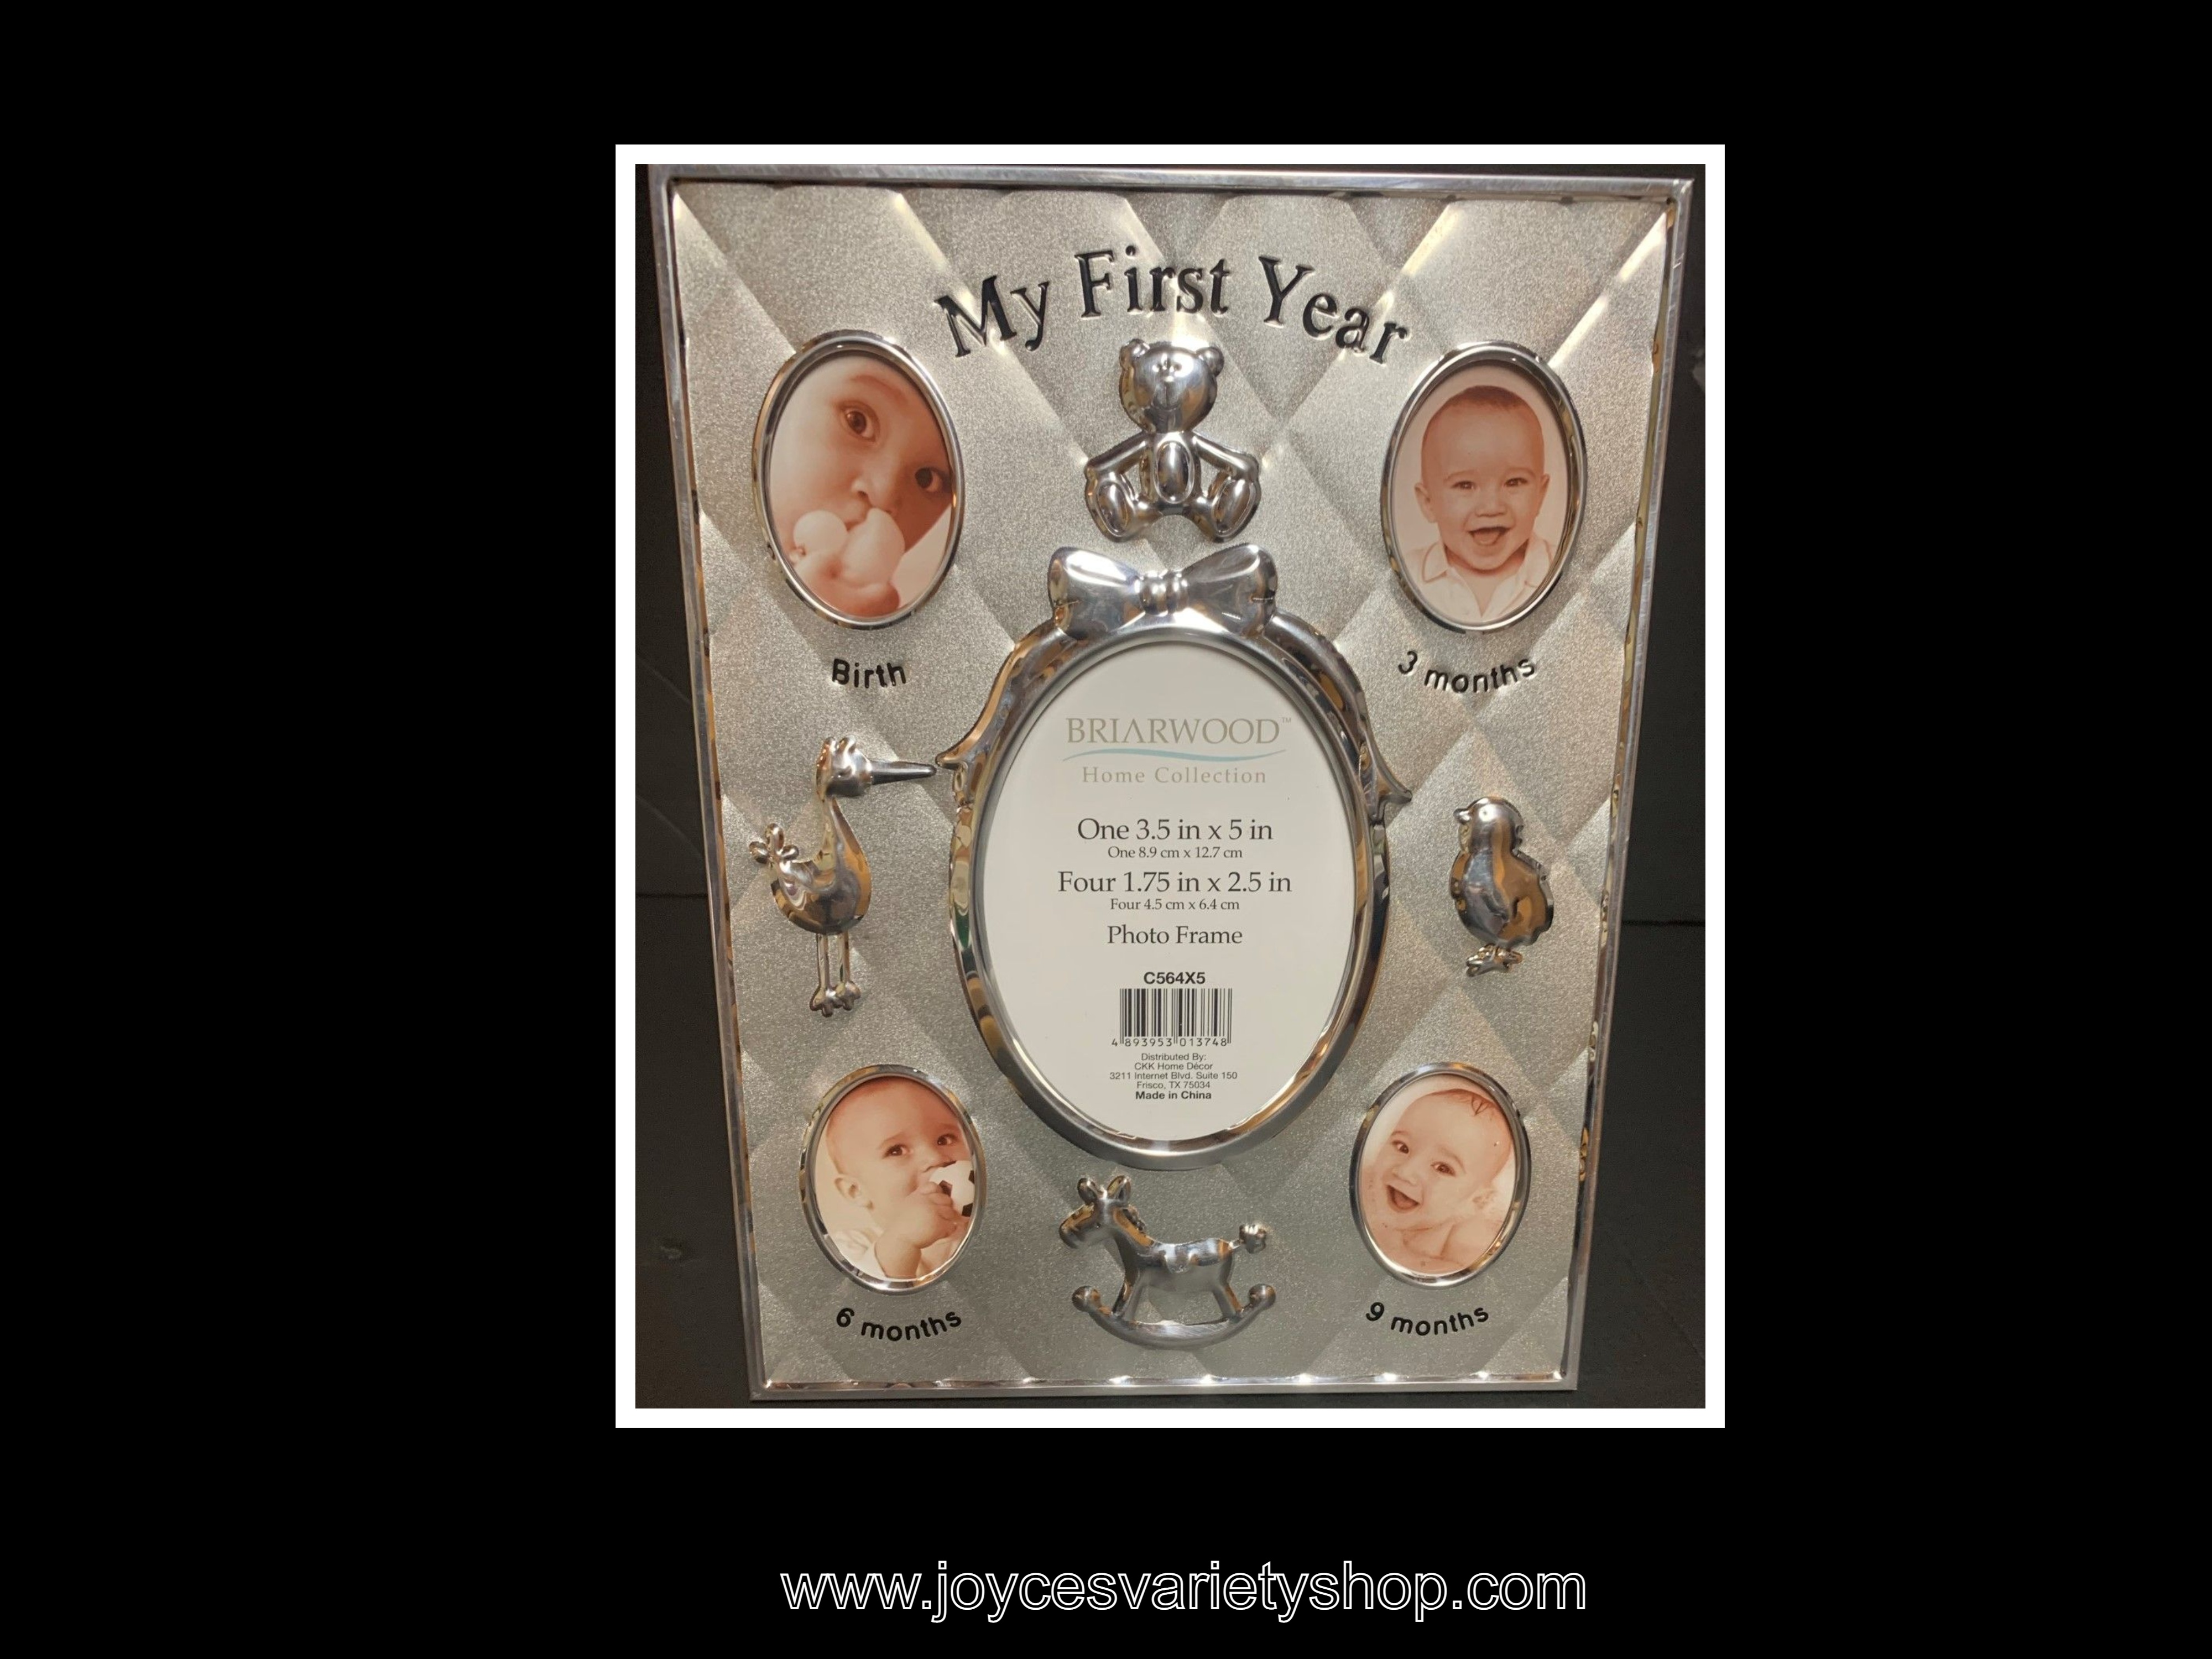 My First Year Photo Frame Silver Plated Briarwood Home Collection Table or Wall